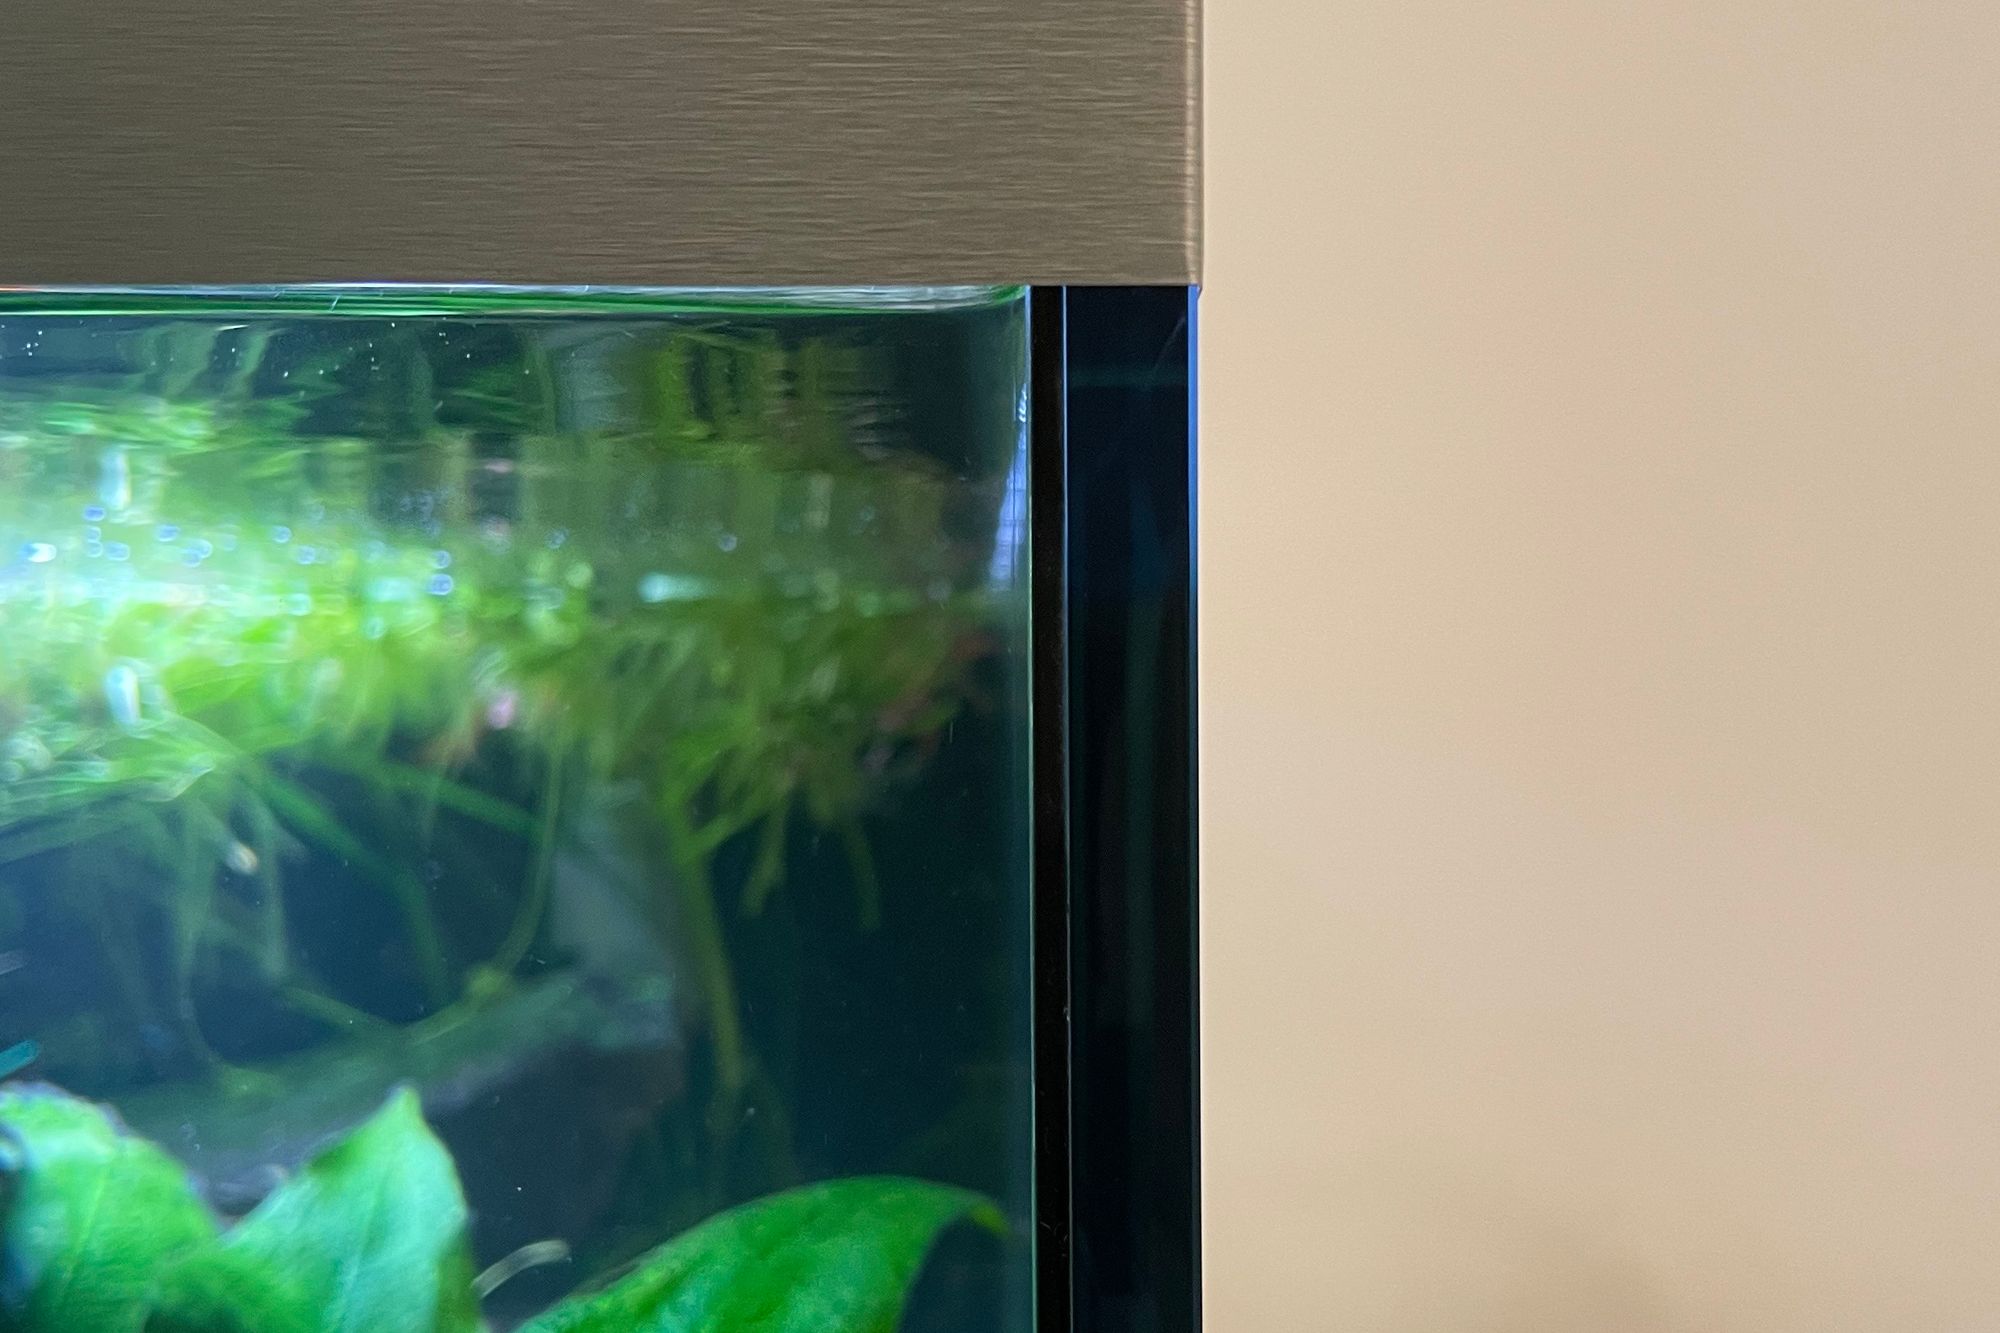 How to Find the Best Aquarium Tank for Your Needs